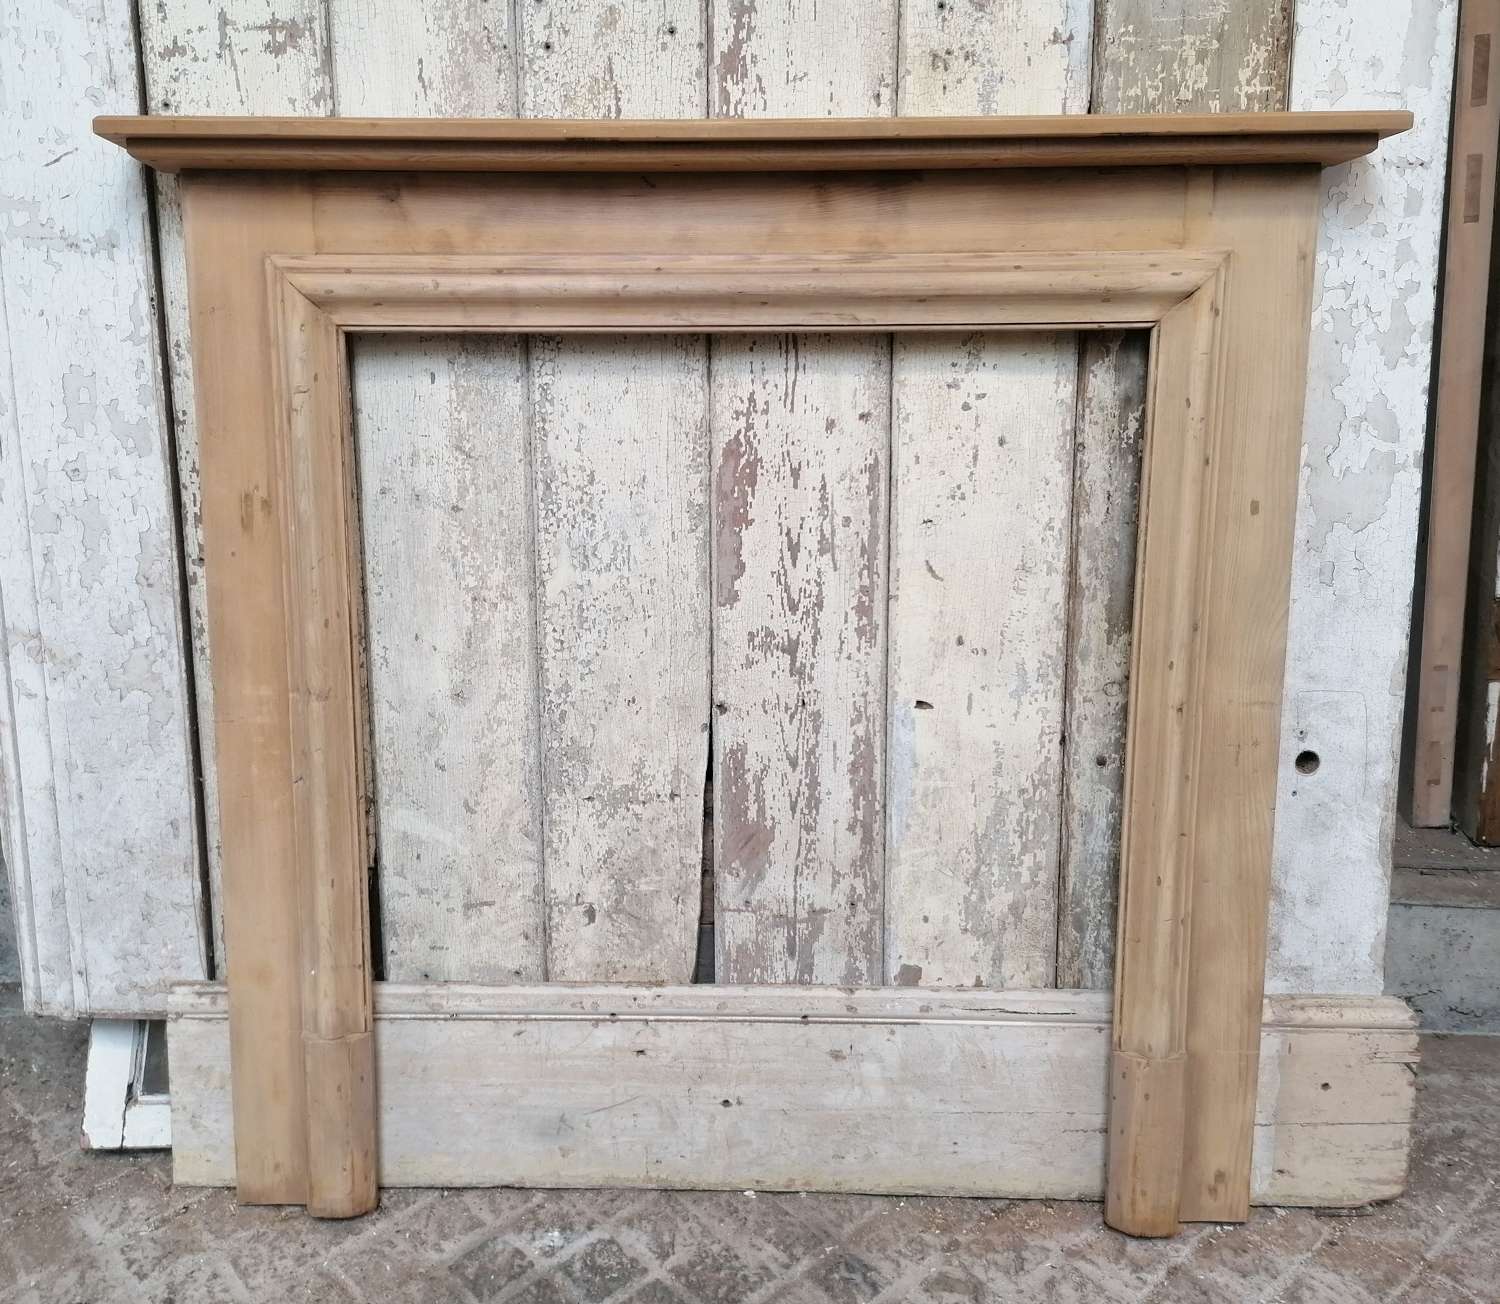 FS0213 A RECLAIMED STRIPPED PINE FIRE SURROUND